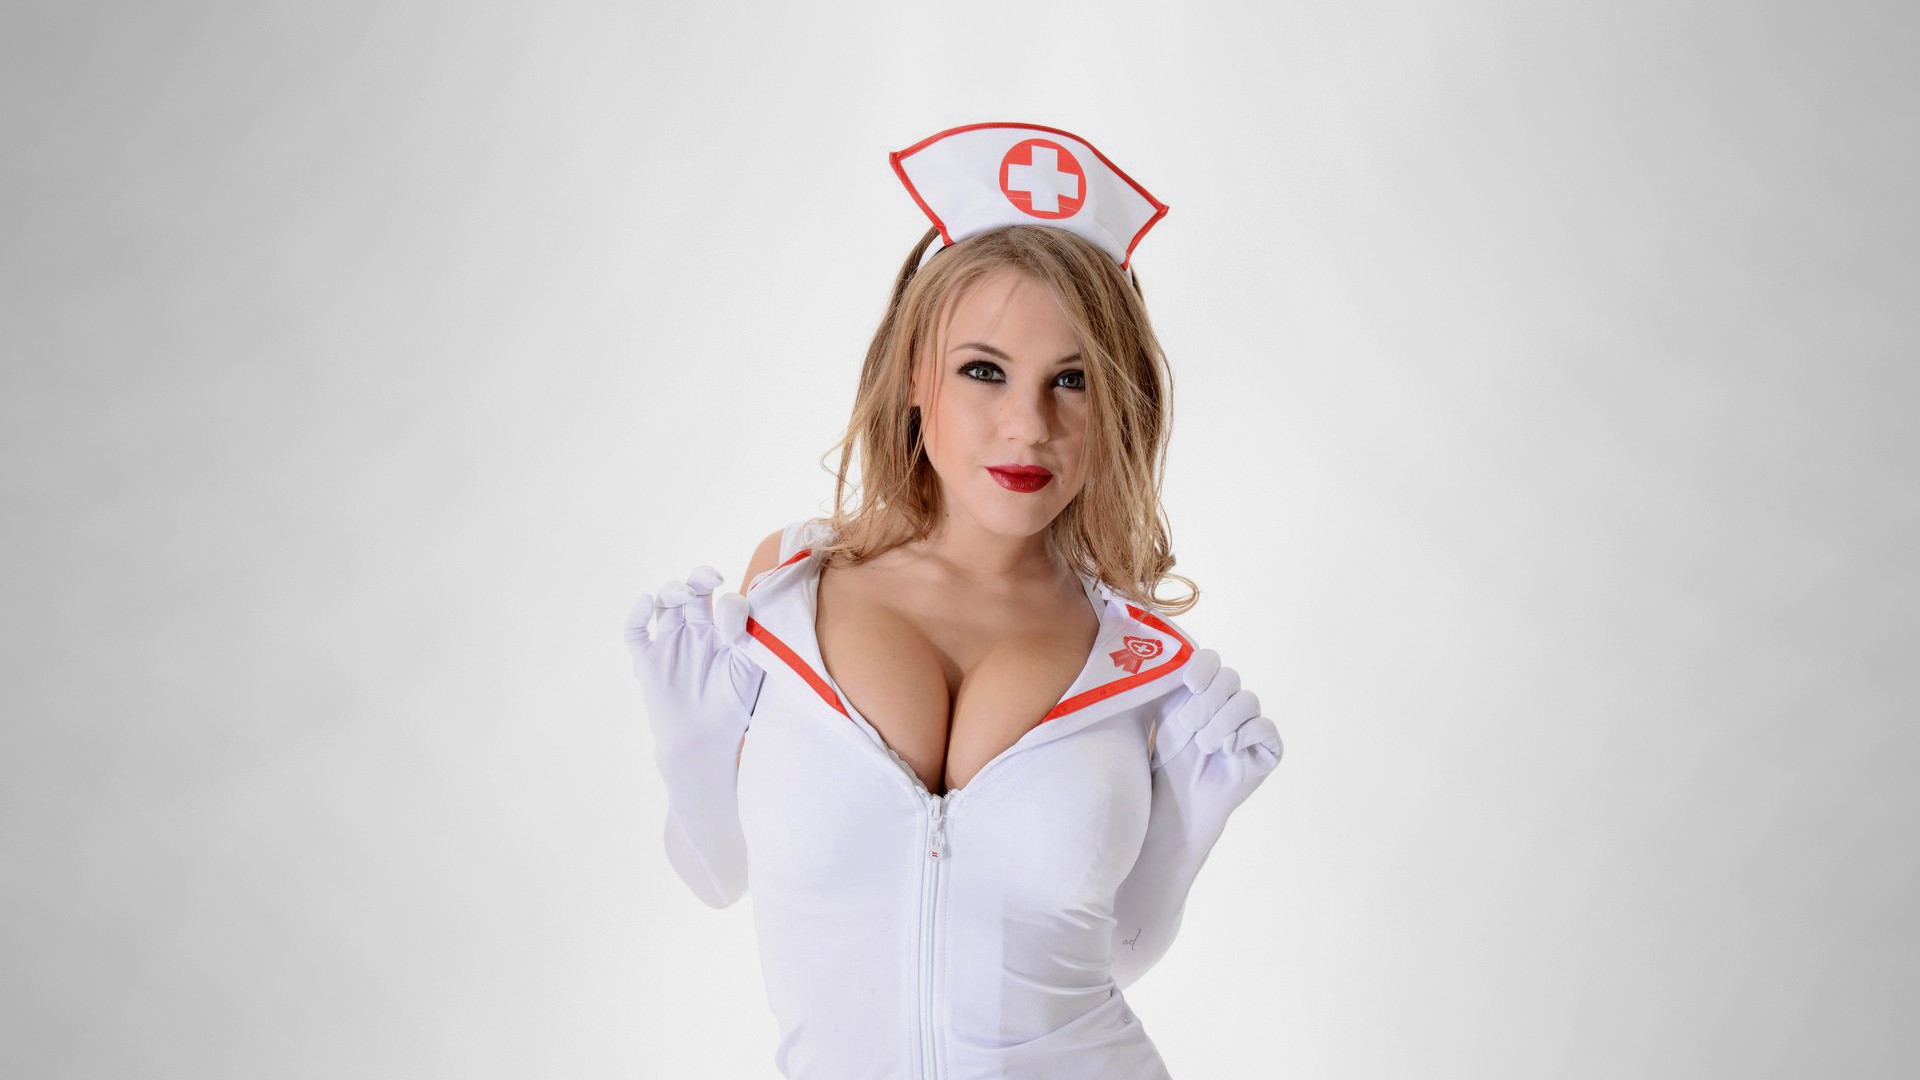 big boobs, Viola Bailey, blonde, simple background, nurse outfit, model -  wallpaper #196272 (1920x1080px) on